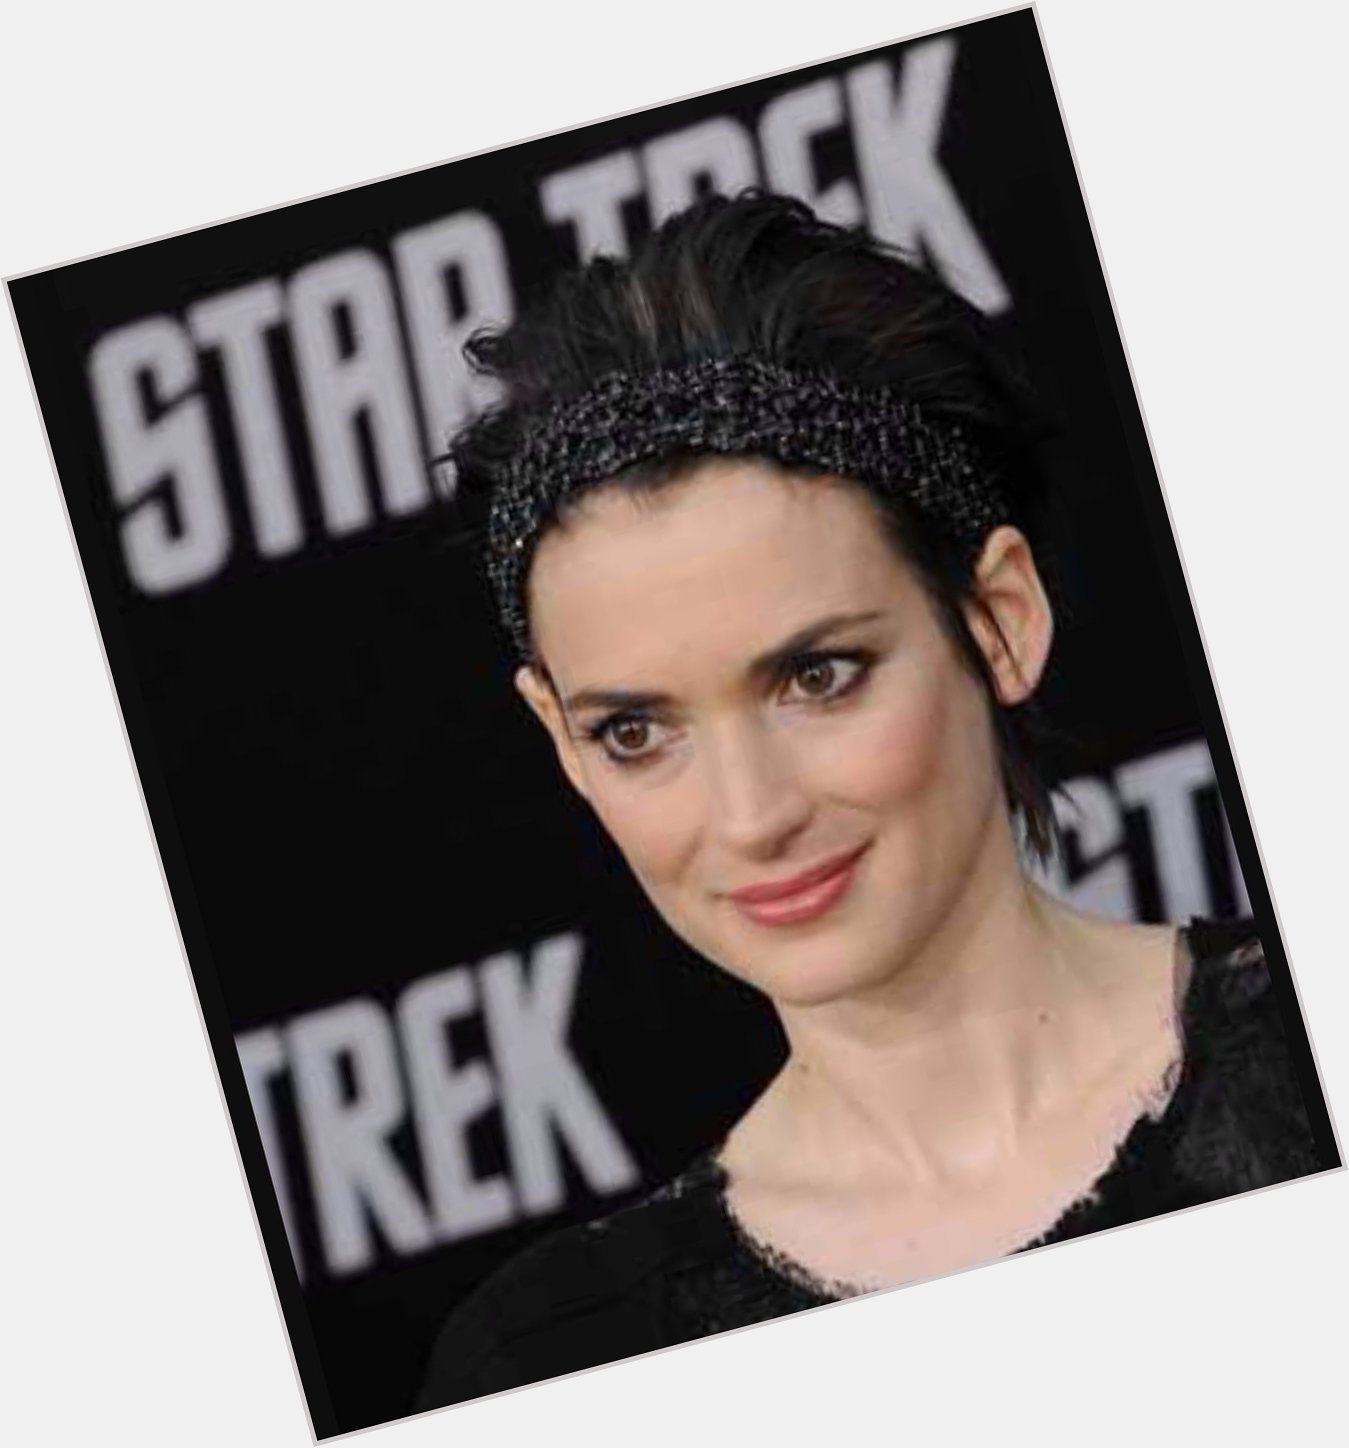 ....                Mother of Spock               ....

Happy 44th Birthday to Winona Ryder! 